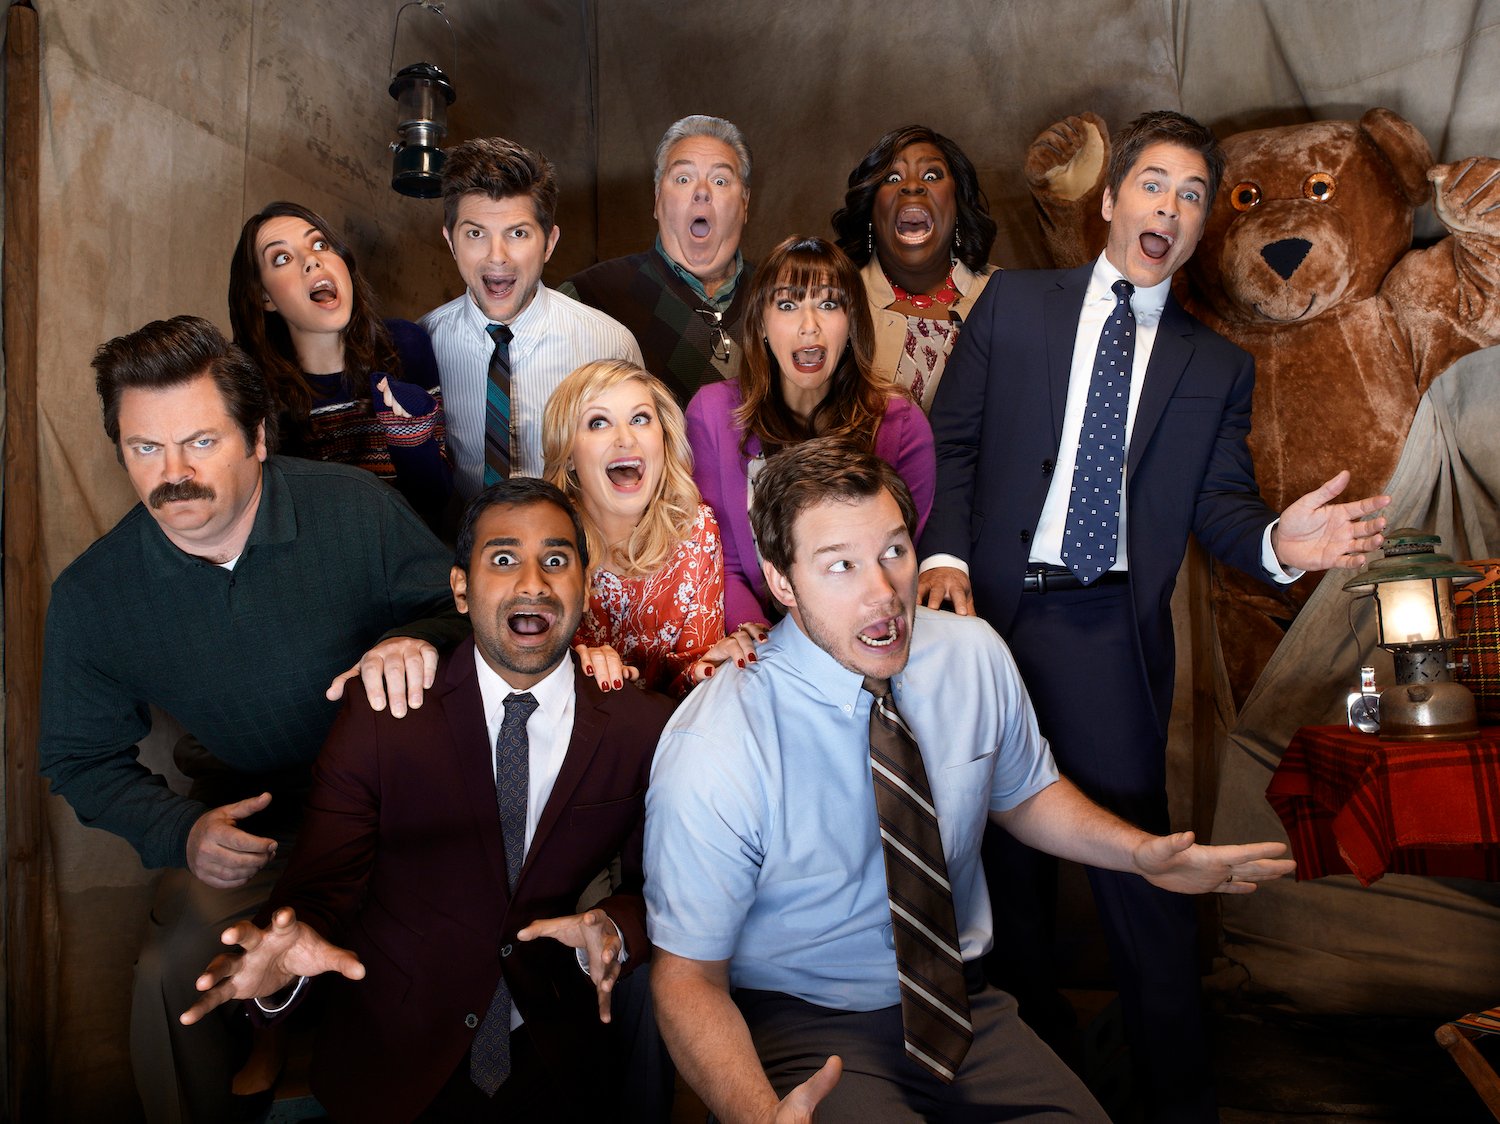 Parks and Recreation cast pretends to act scared